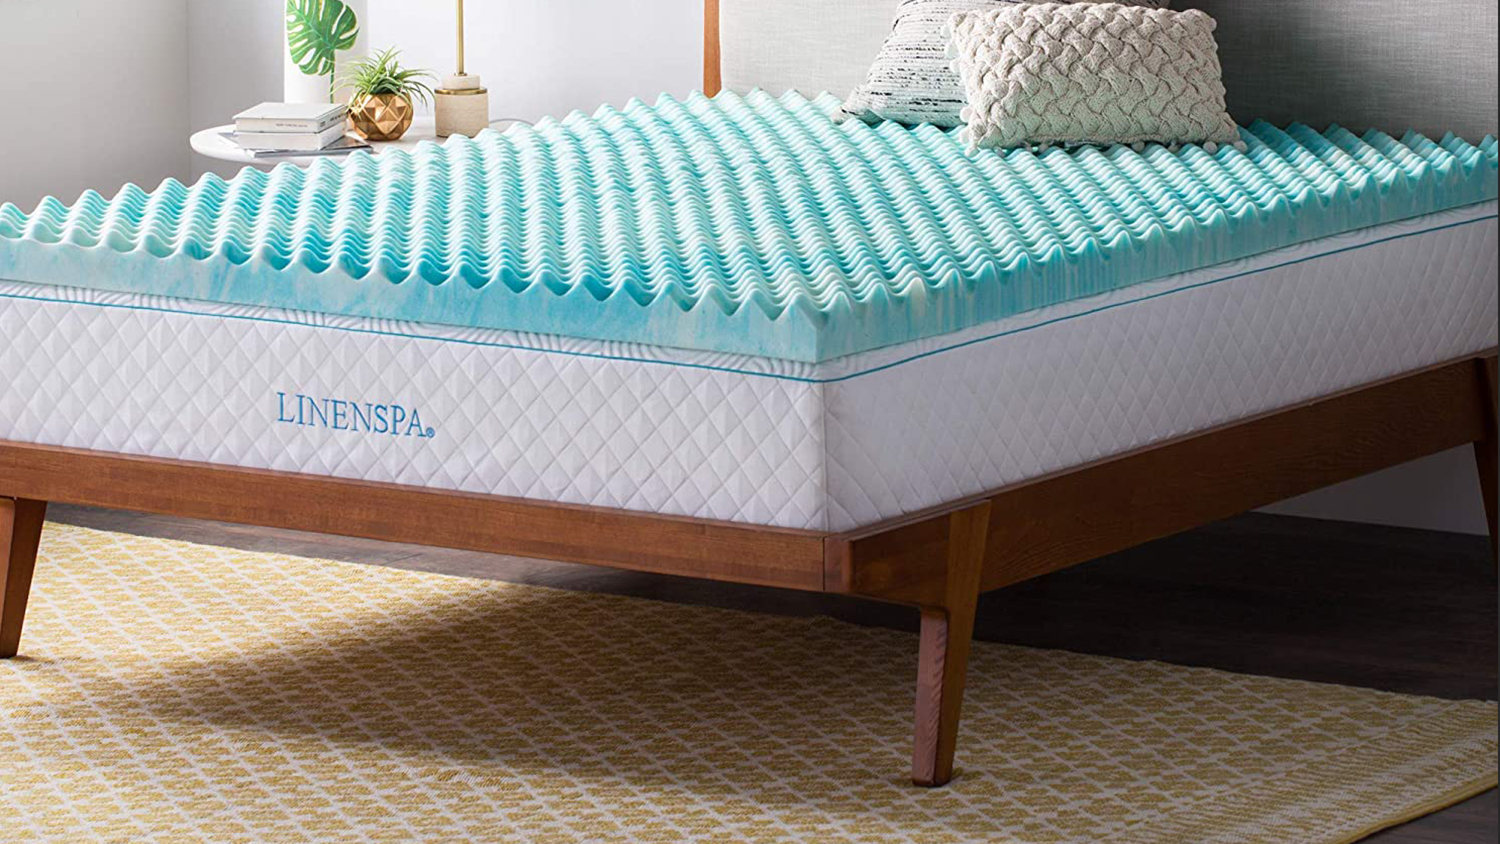 mattress topper for low back pain